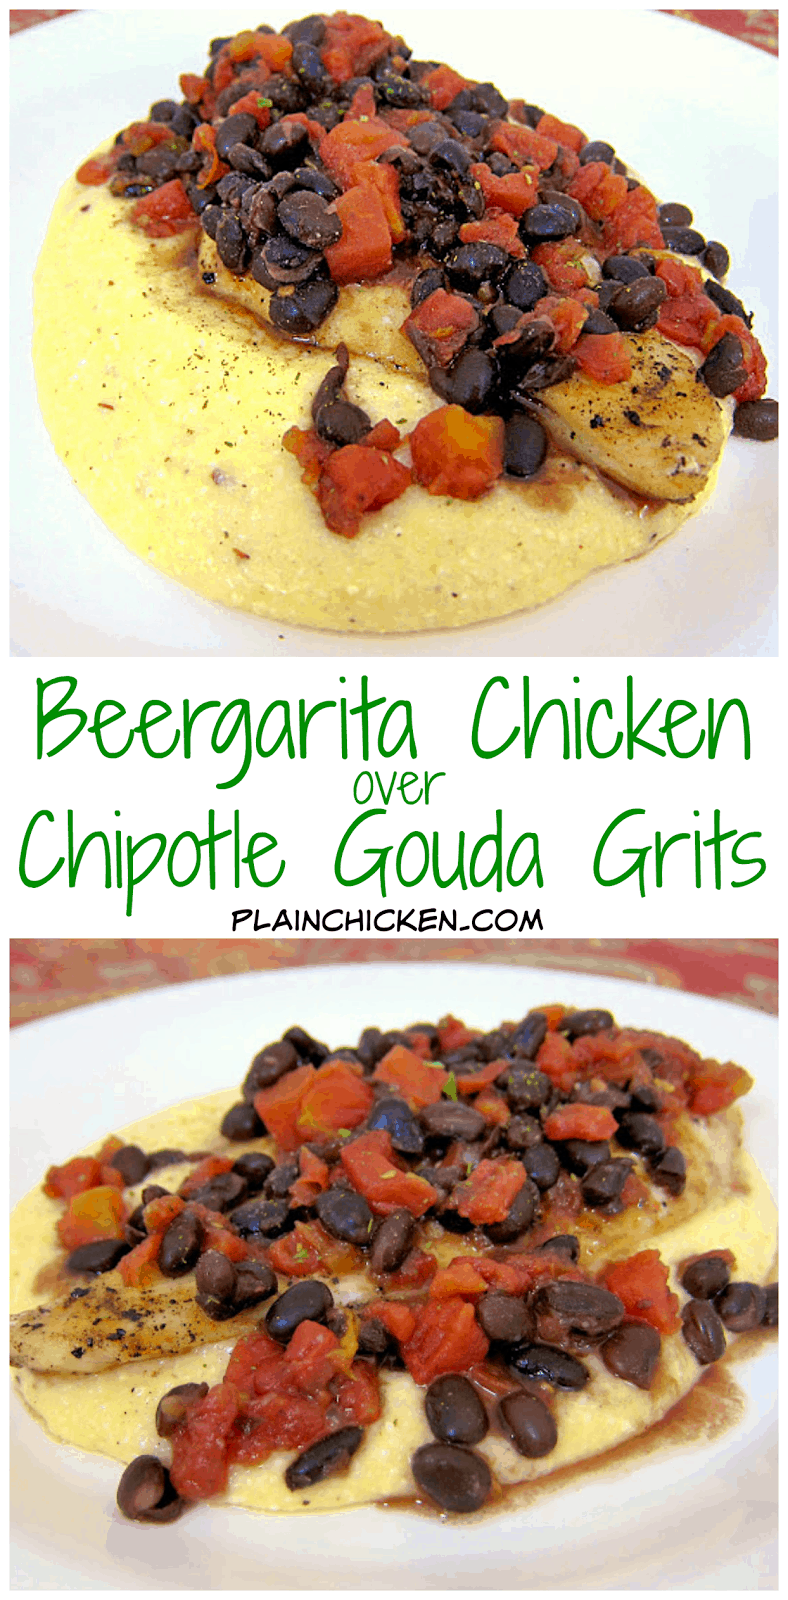 Beergaria Chicken over Chipotle Gouda Grits Recipe - chicken marinated in margarita mix, beer, and rotel, grilled and served over chipotle gouda grits and topped with spicy black beans. We literally licked our plates! Great mexican fiesta! My husband inhaled this and asked if I made extra - next time I will double the recipe. It is that good!